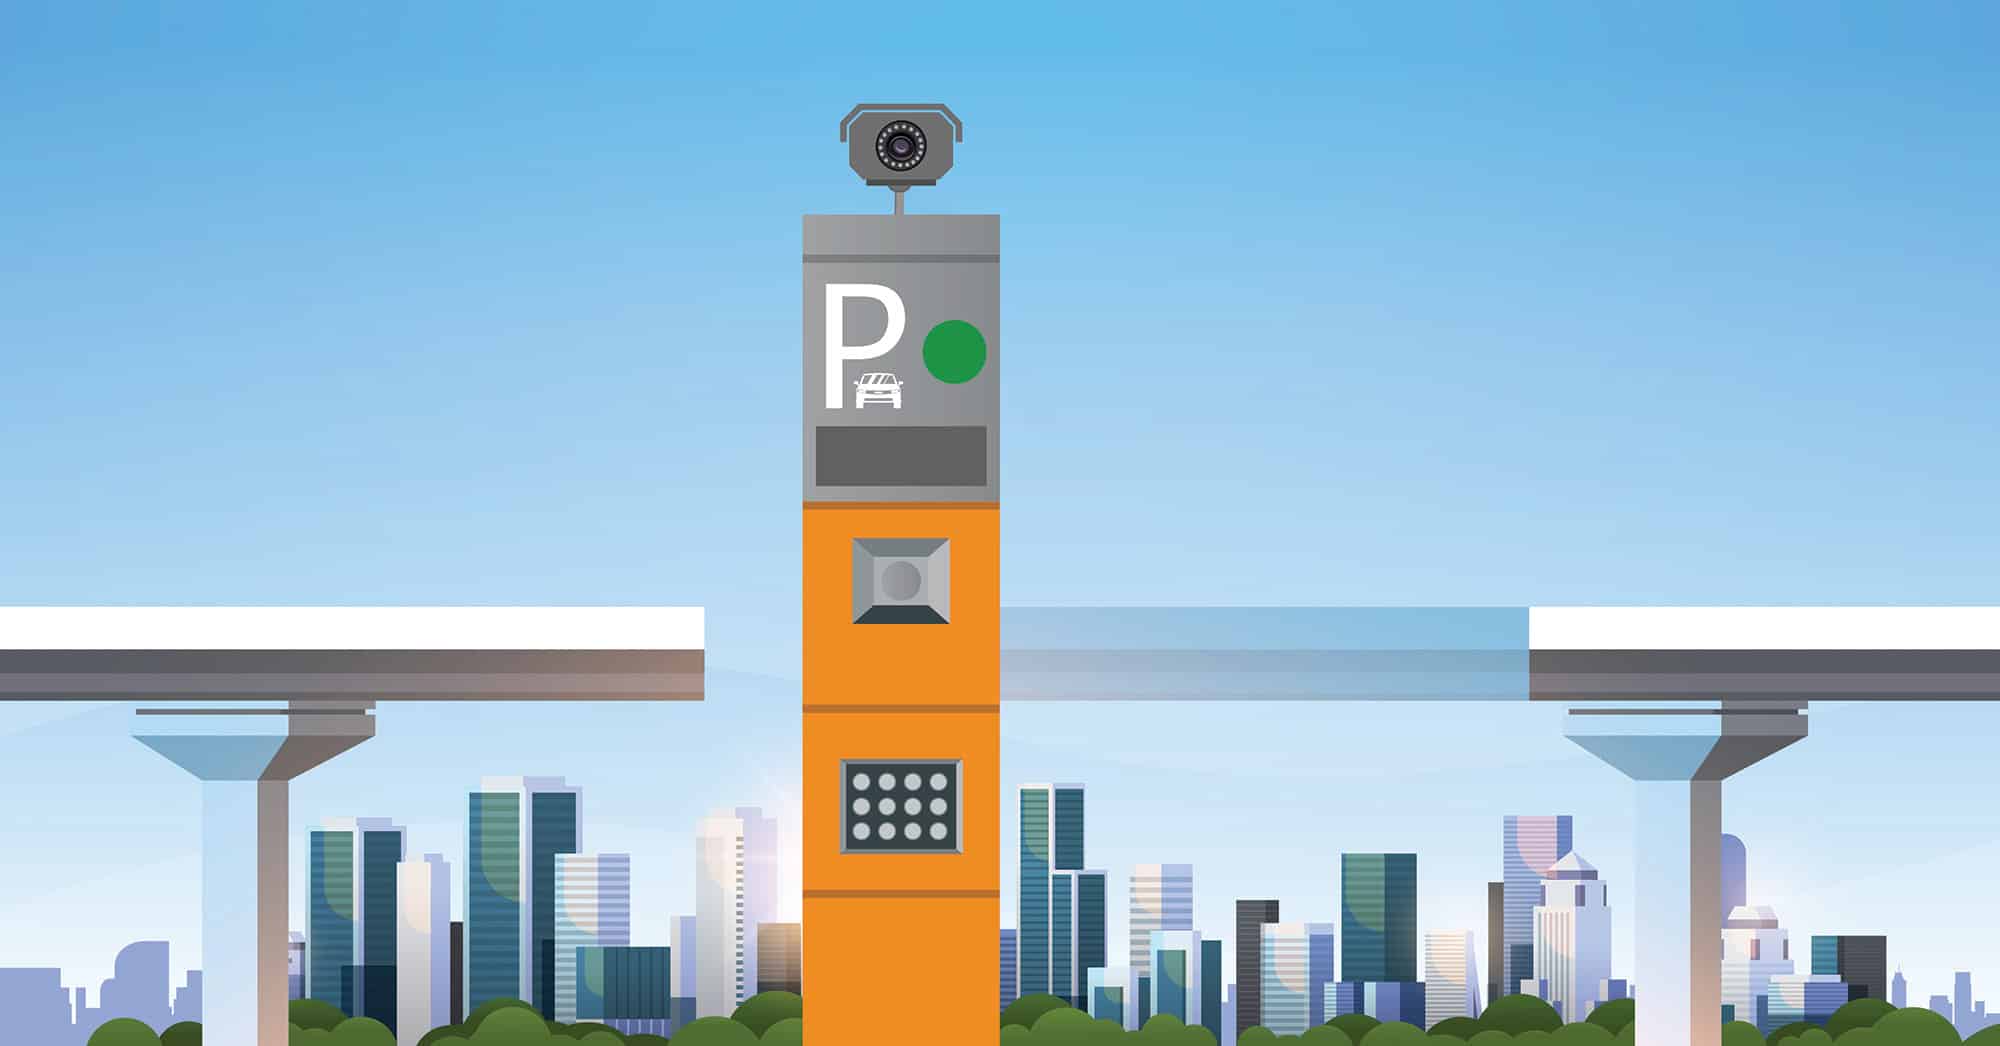 An illustration of a parking meter with a cityscape in the background.